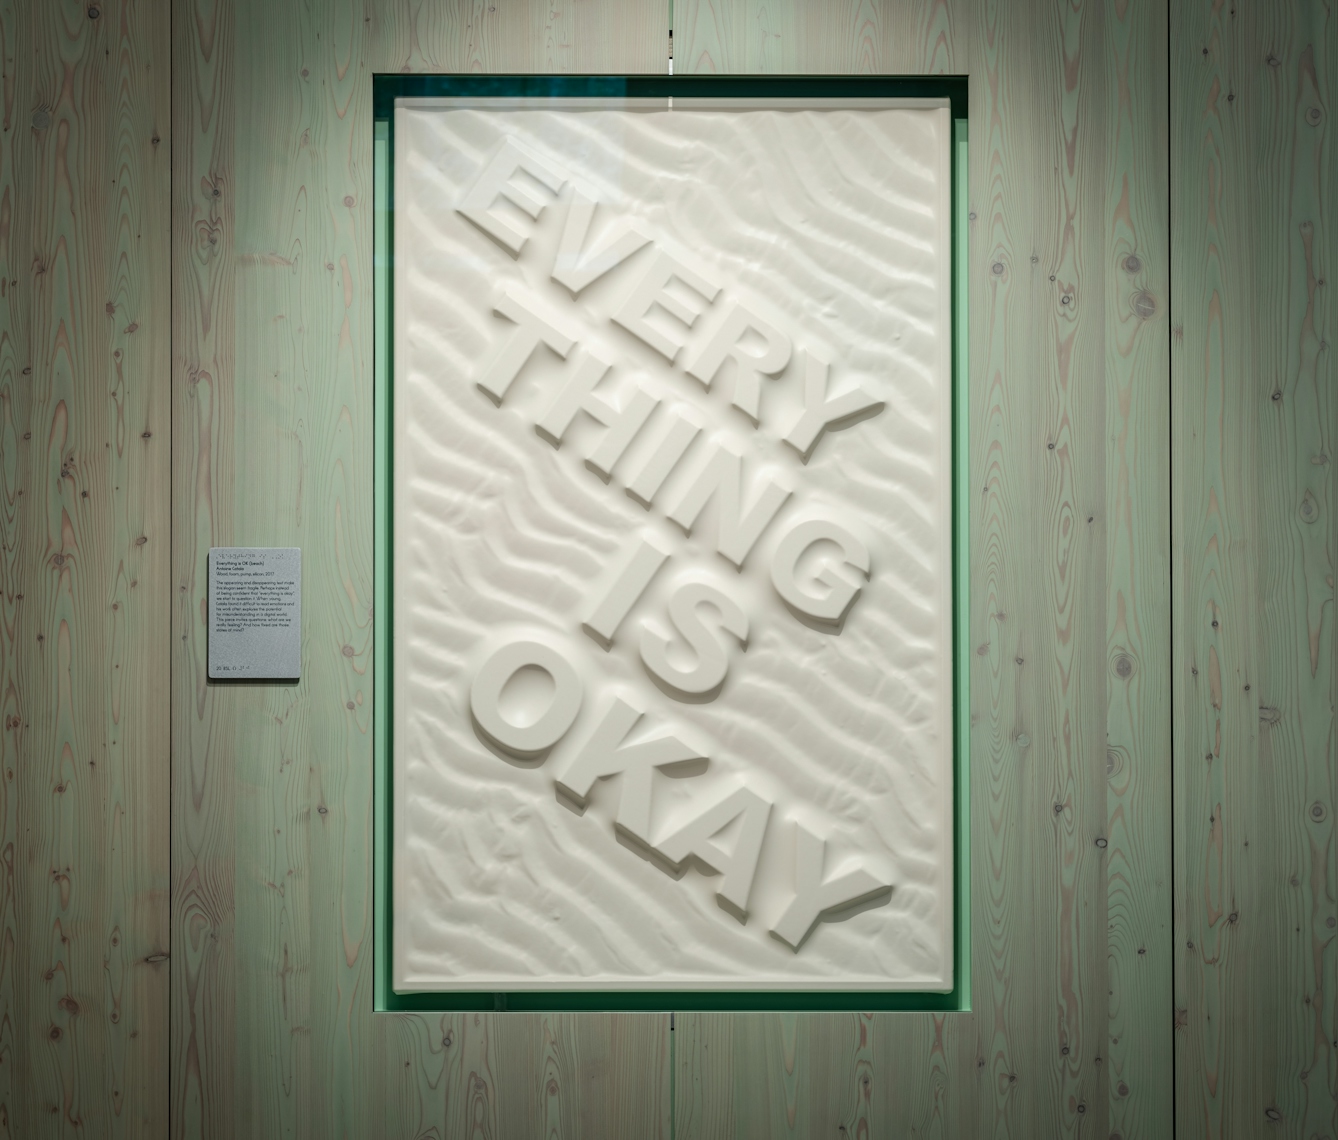 A photograph of a large off-white rectangular panel with EVERY THING IS OKAY in relief in large capital letters diagonally across the panel from left to right with one word on each diagonal line. Repeating undulating patterns also move across the panel in the same direction, and the text appears as though a relief in sand. The panel is hung on a light green wood panelled wall.